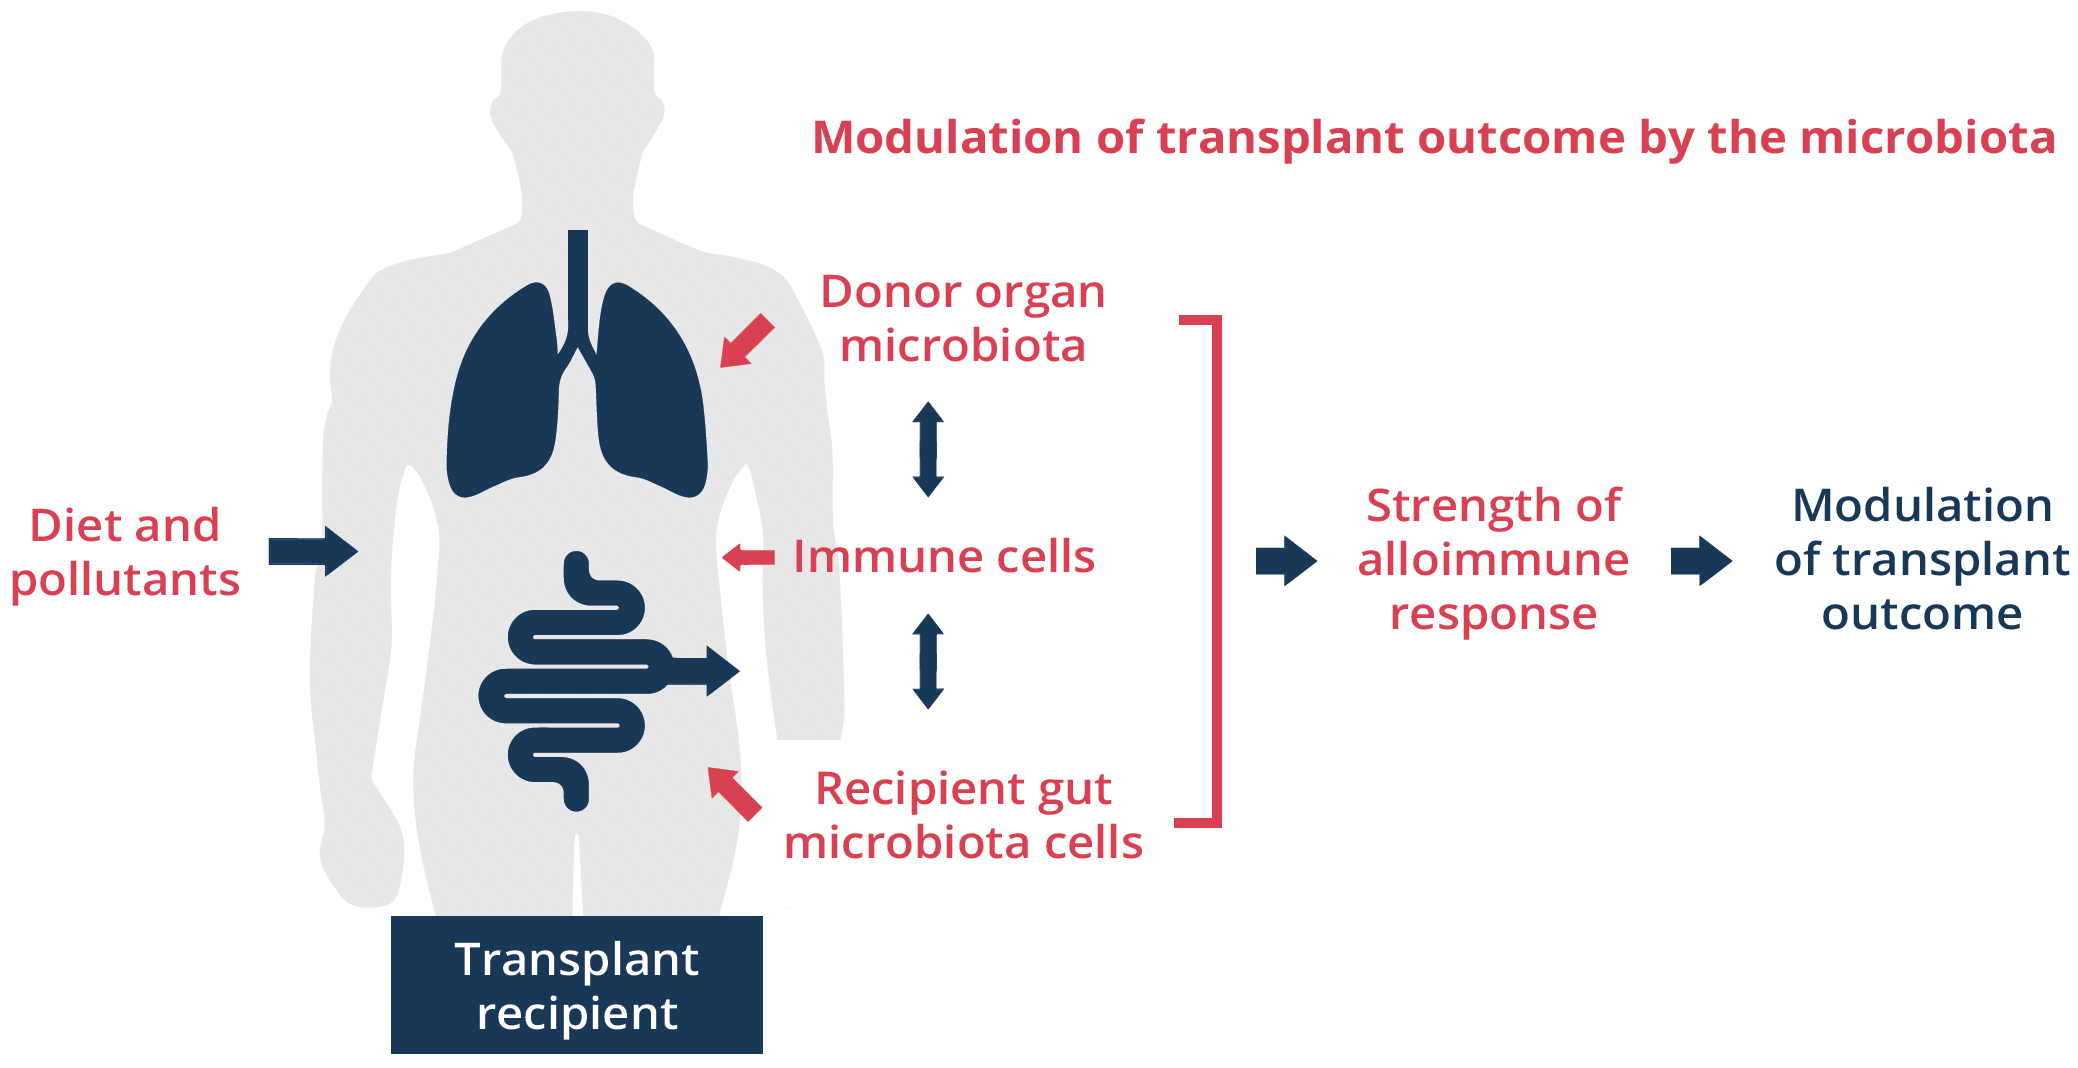 Modulation of transplant outcome by the microbiota and strength of alloimmune response